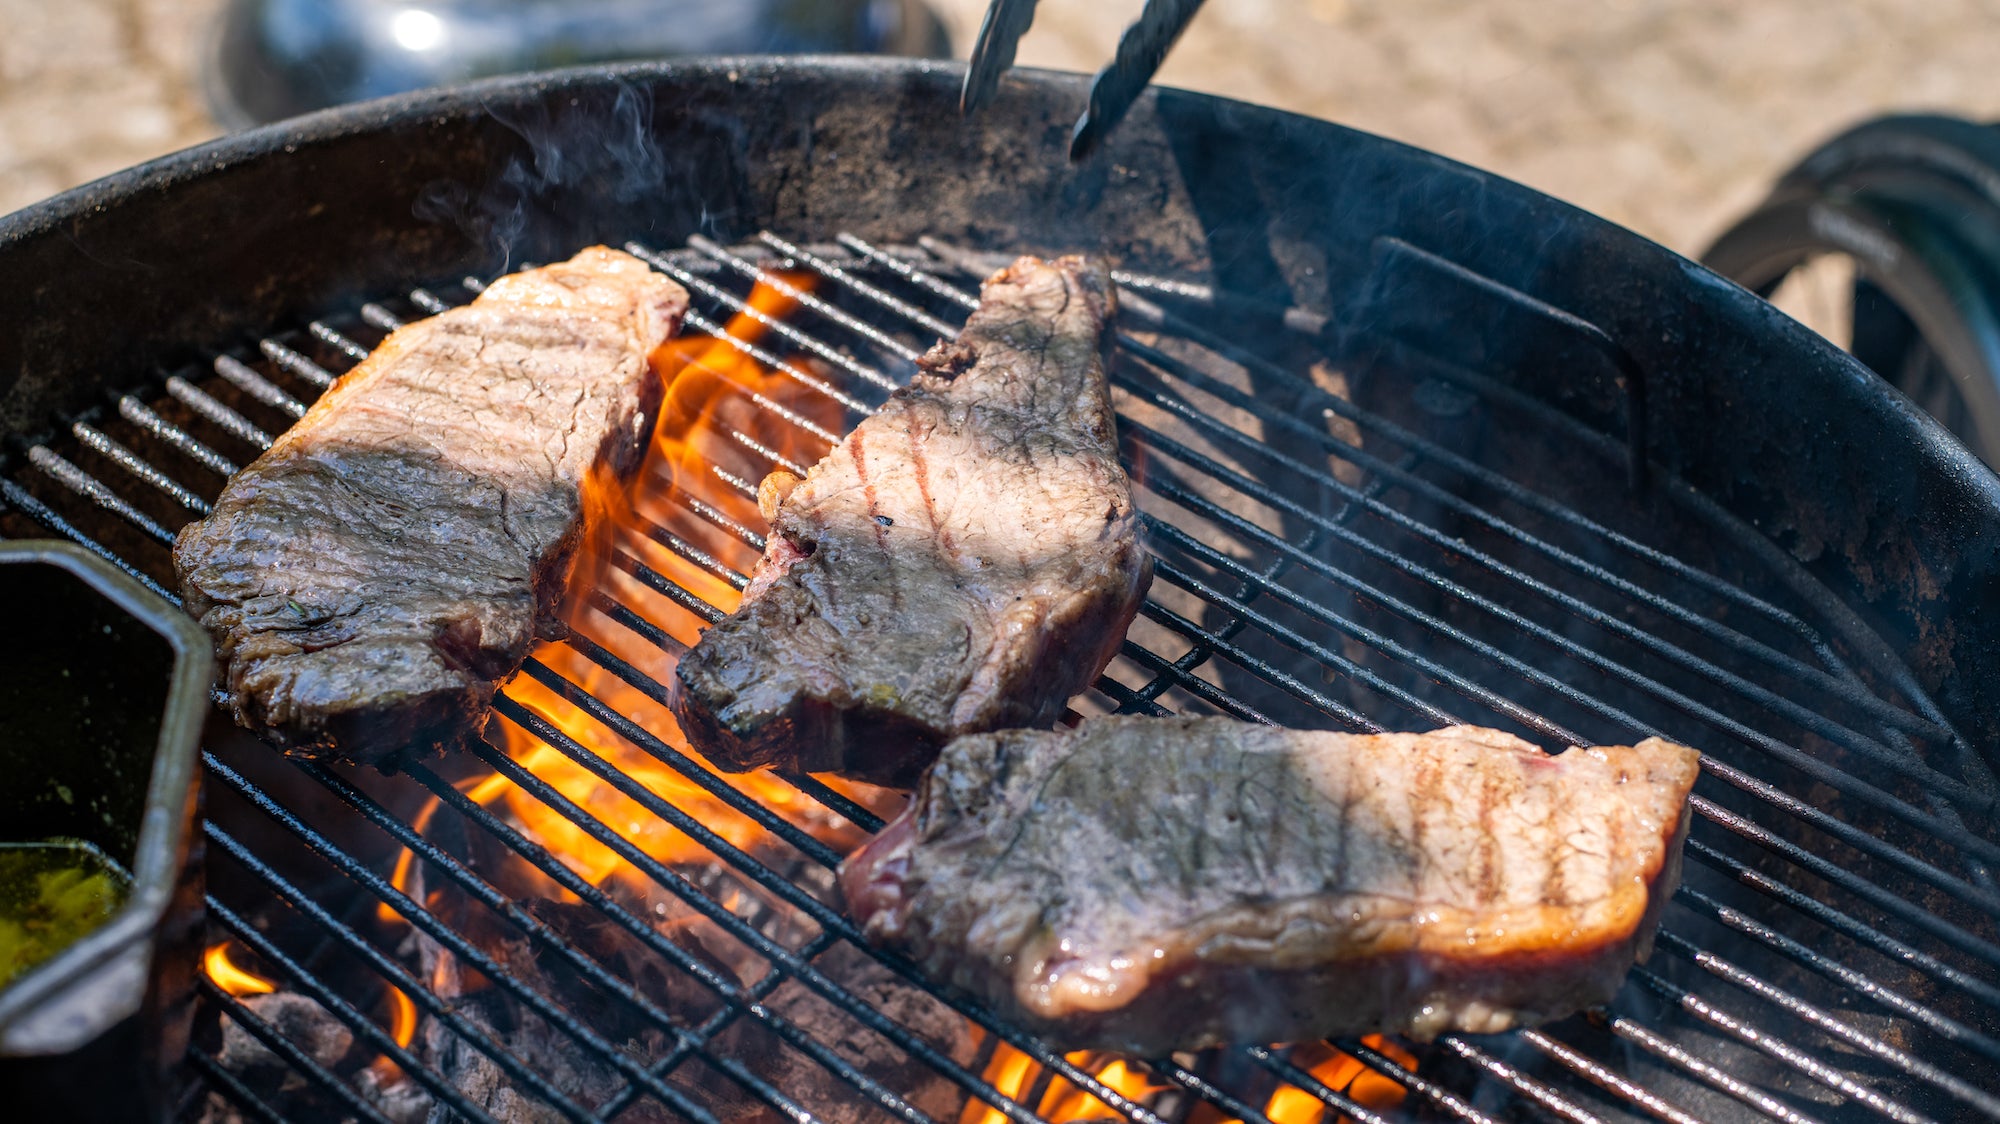 GRILLING 101 - HOW TO GRILL THE PERFECT STEAK